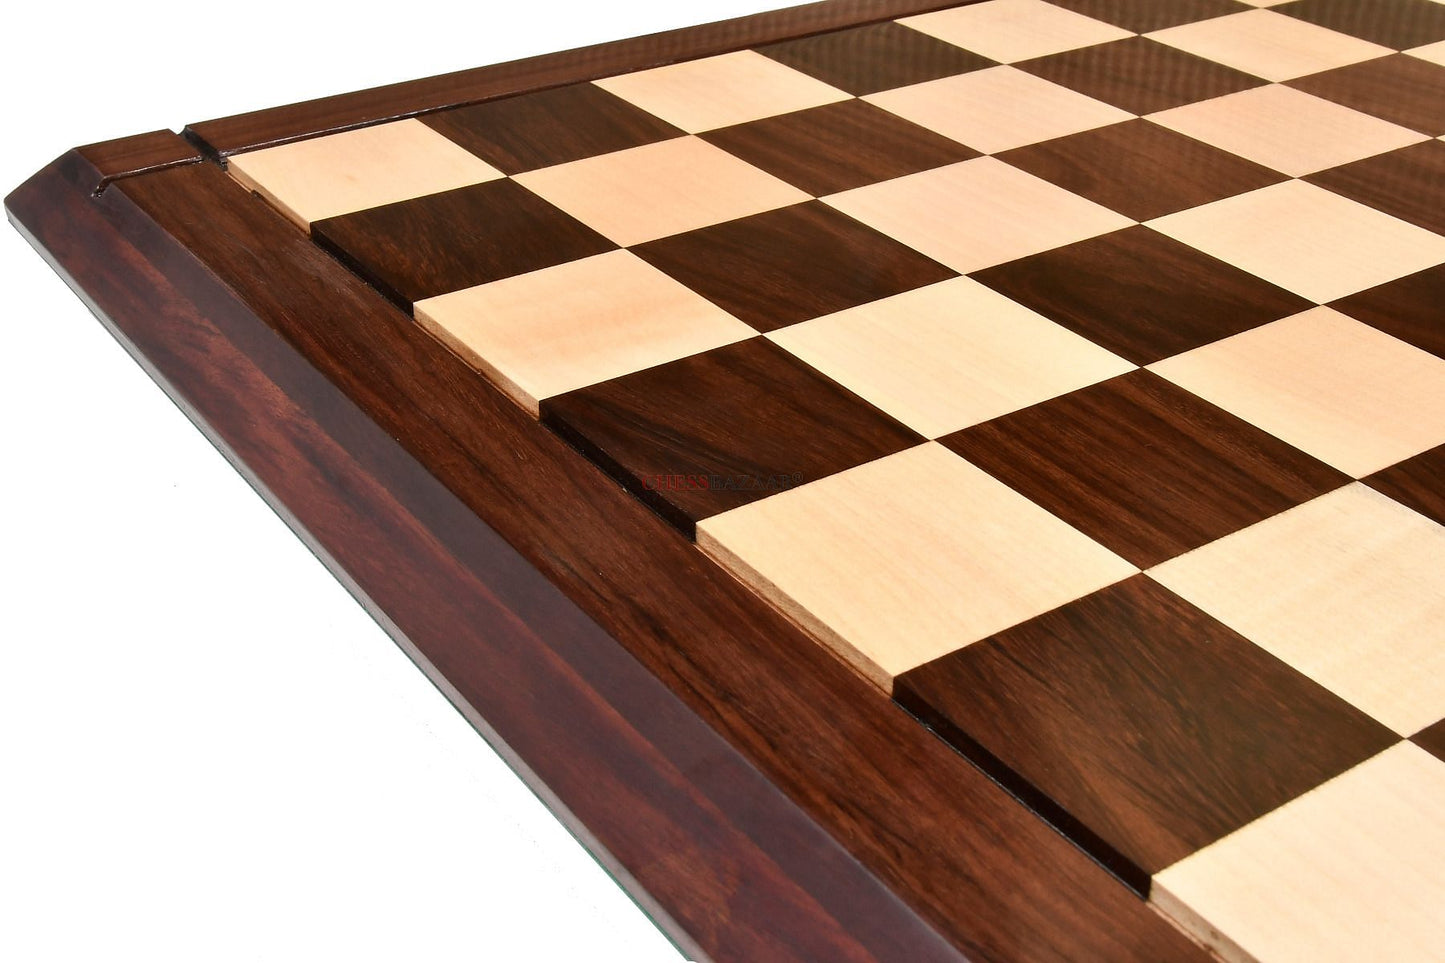 Deluxe Indian Rosewood / Maple Wooden Chess Board 23" - 60 mm